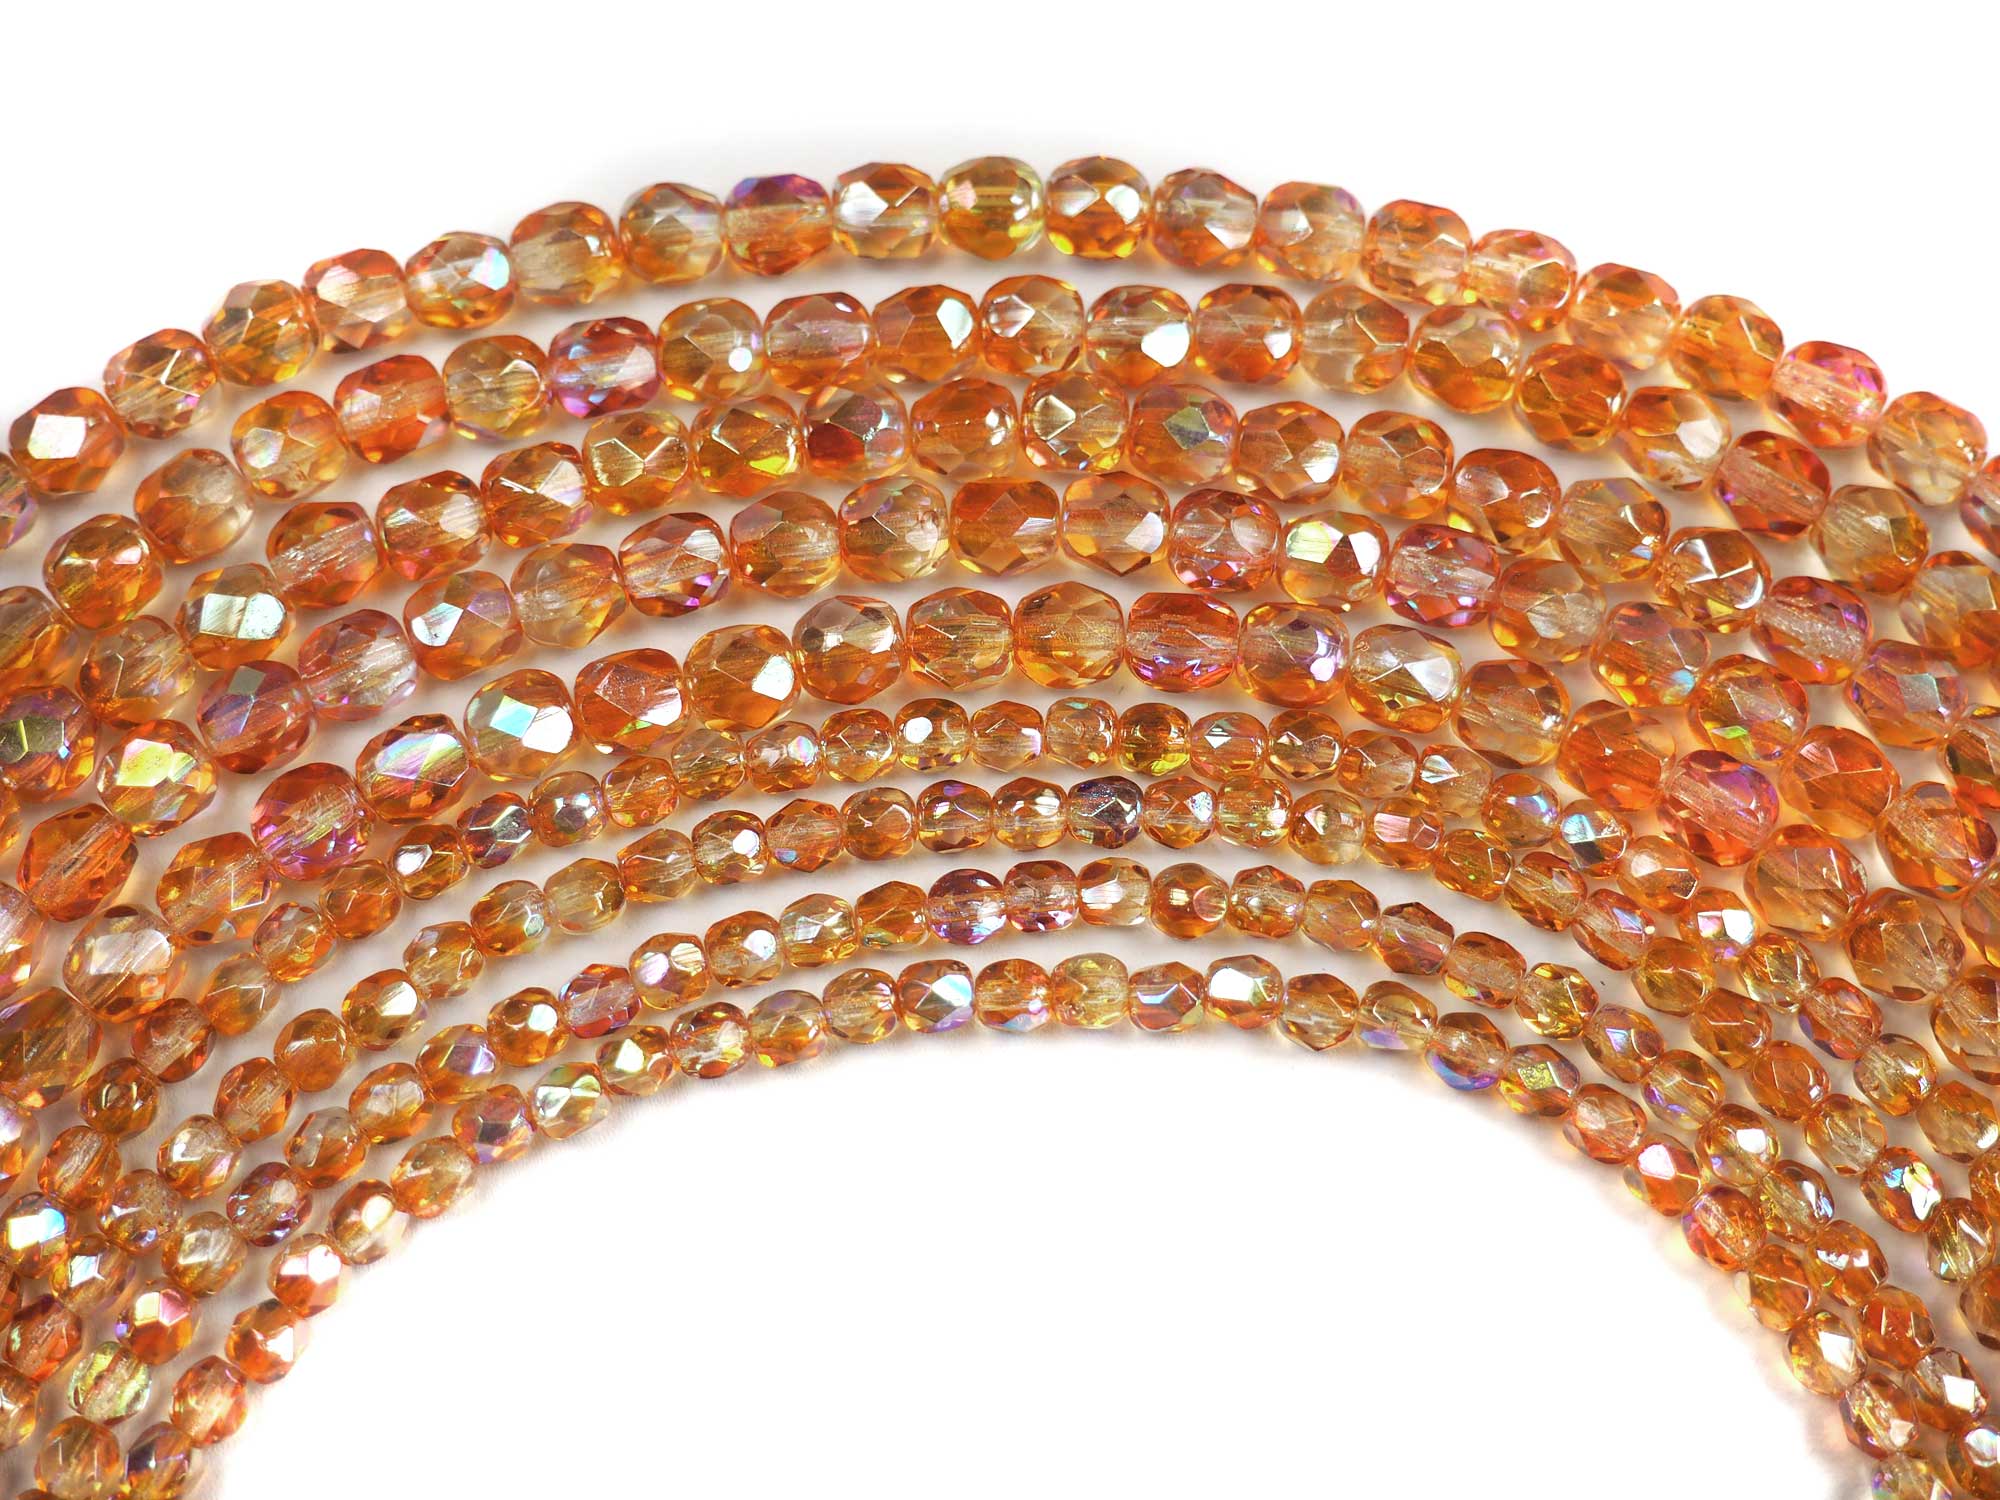 Crystal Apricot Rainbow coated, Czech Fire Polished Round Faceted Glass Beads, 16" strand